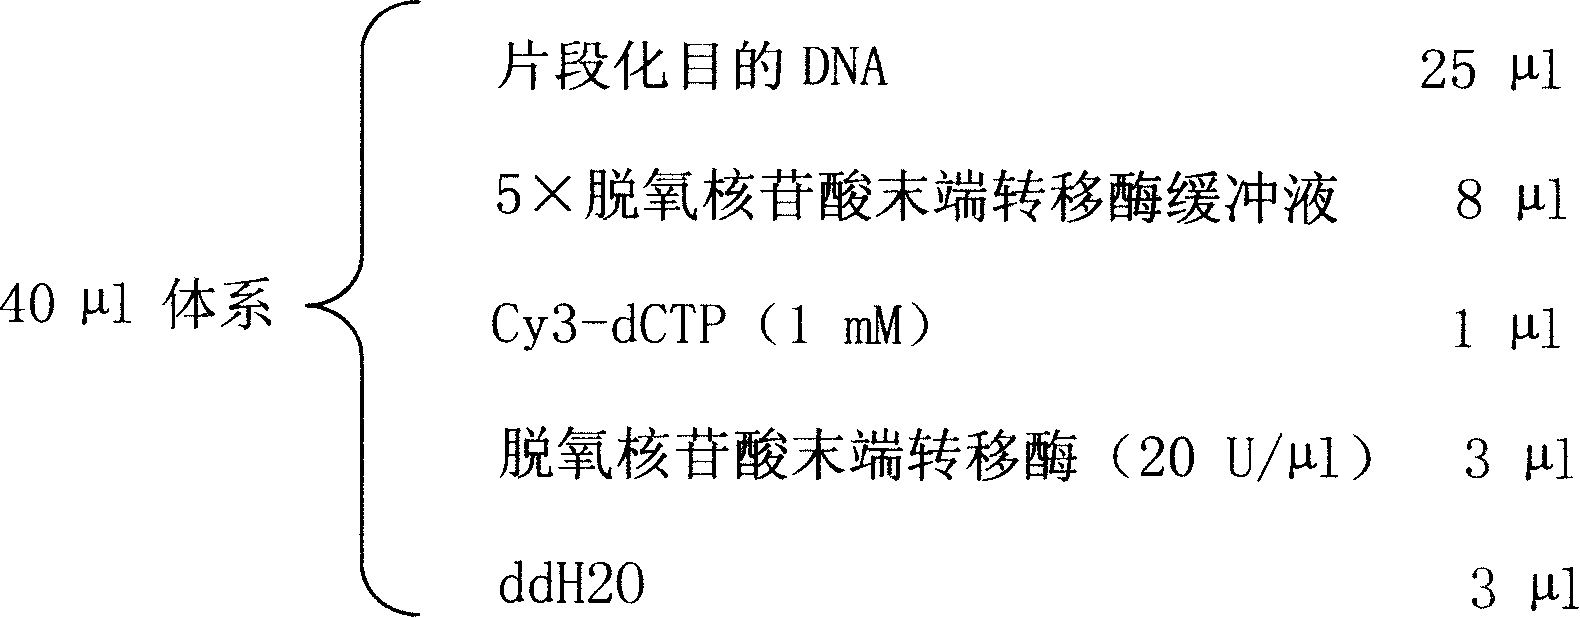 Oligonucleotide chip for detecting complete genome CpG island and uses thereof